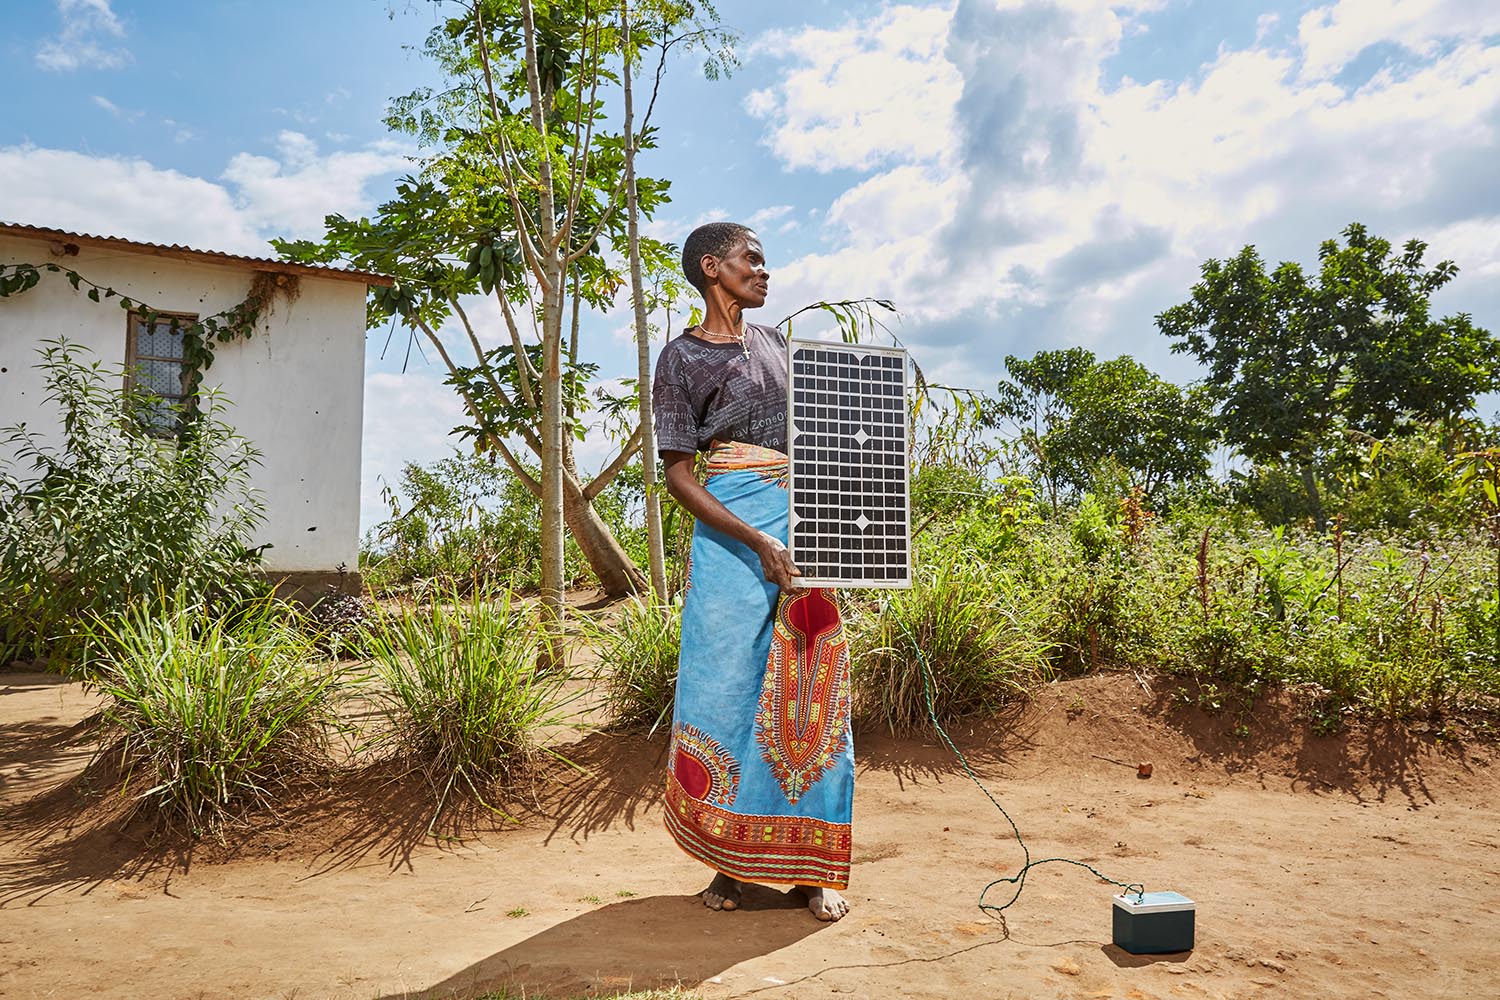  Violet Napazi, 57, holds up the solar panel owned by her son, Luchenza, Malawi, 2017.  Charging mobile phones is becoming a profitable business, especially since solar panels are becoming cheaper to buy and build. Until recently, Violet’s family use